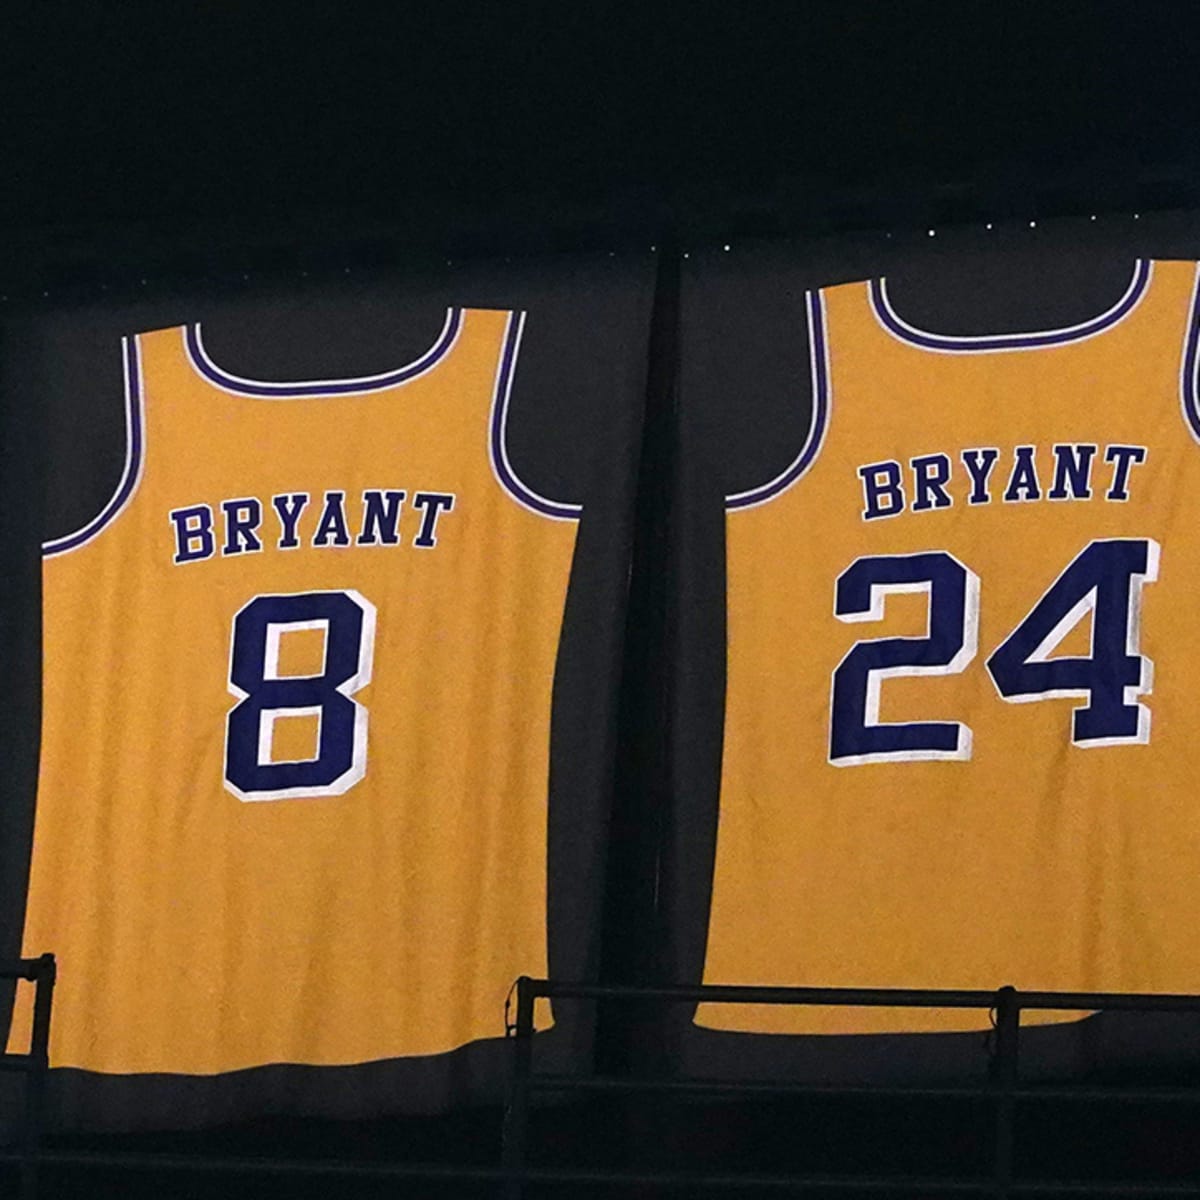 Kobe Bryant jersey auctioned off, starts at $20,000